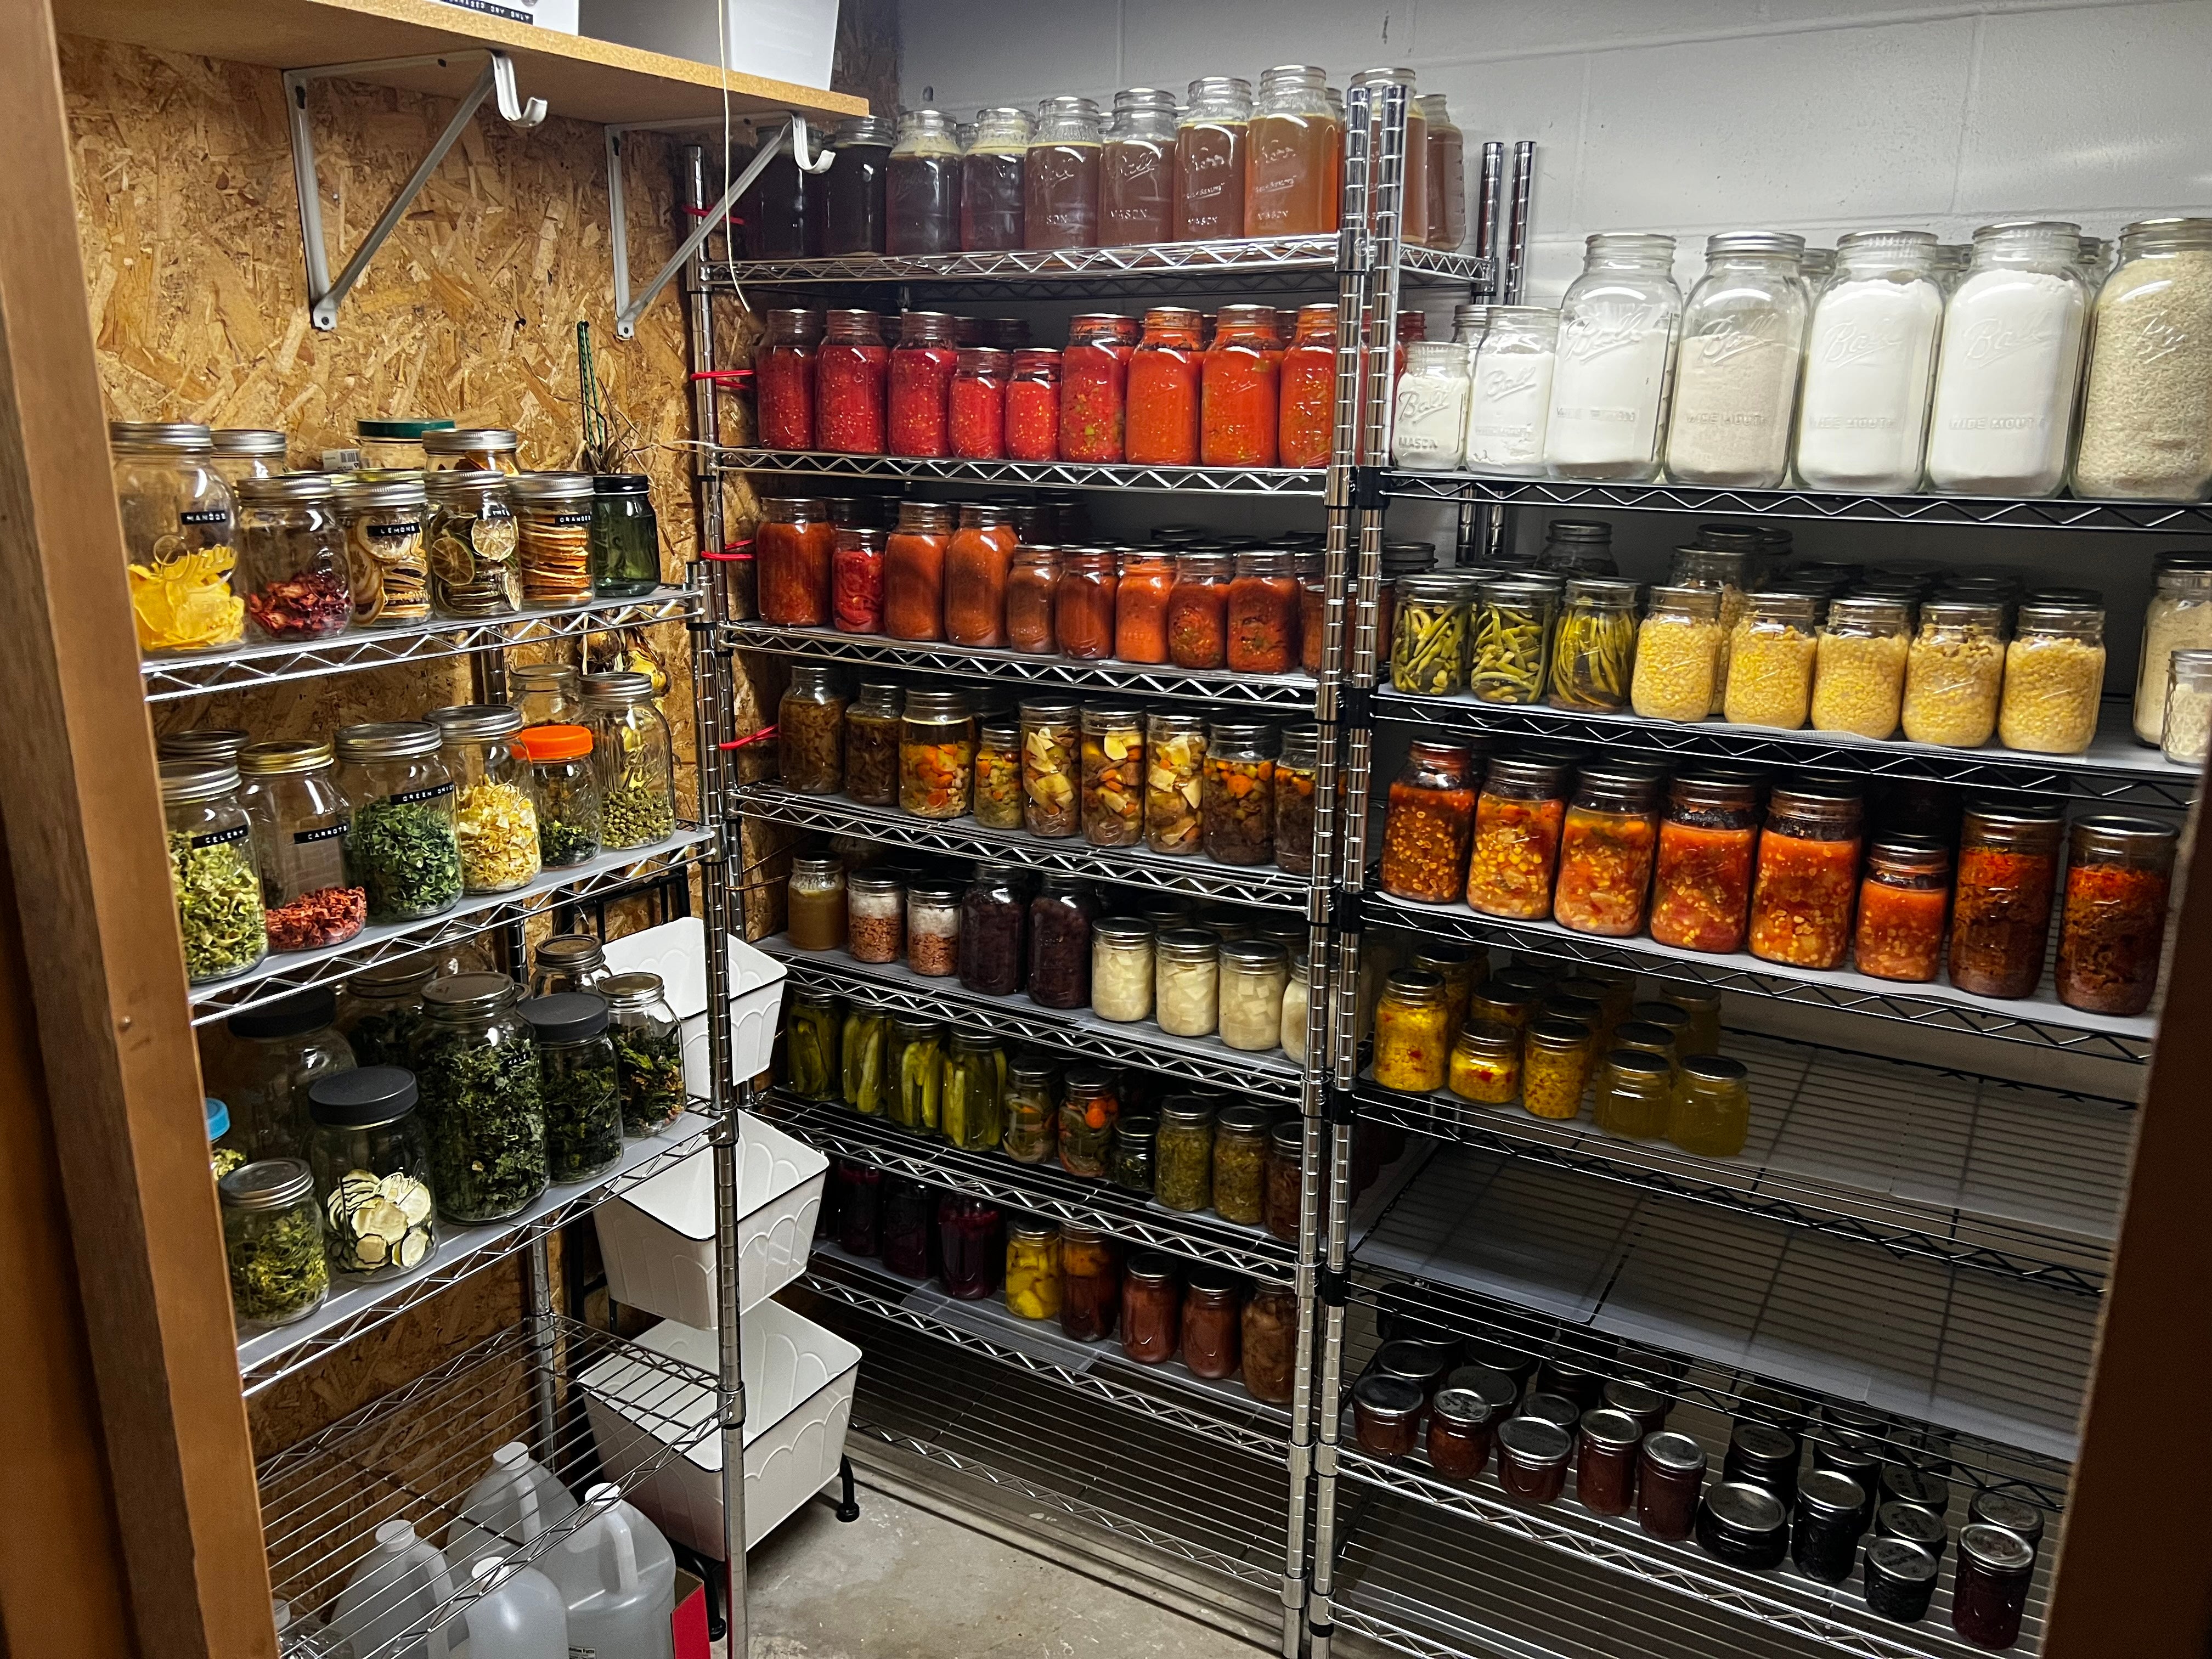 Home Canning: Preserving Food the Old-Fashioned Way – Mother Earth